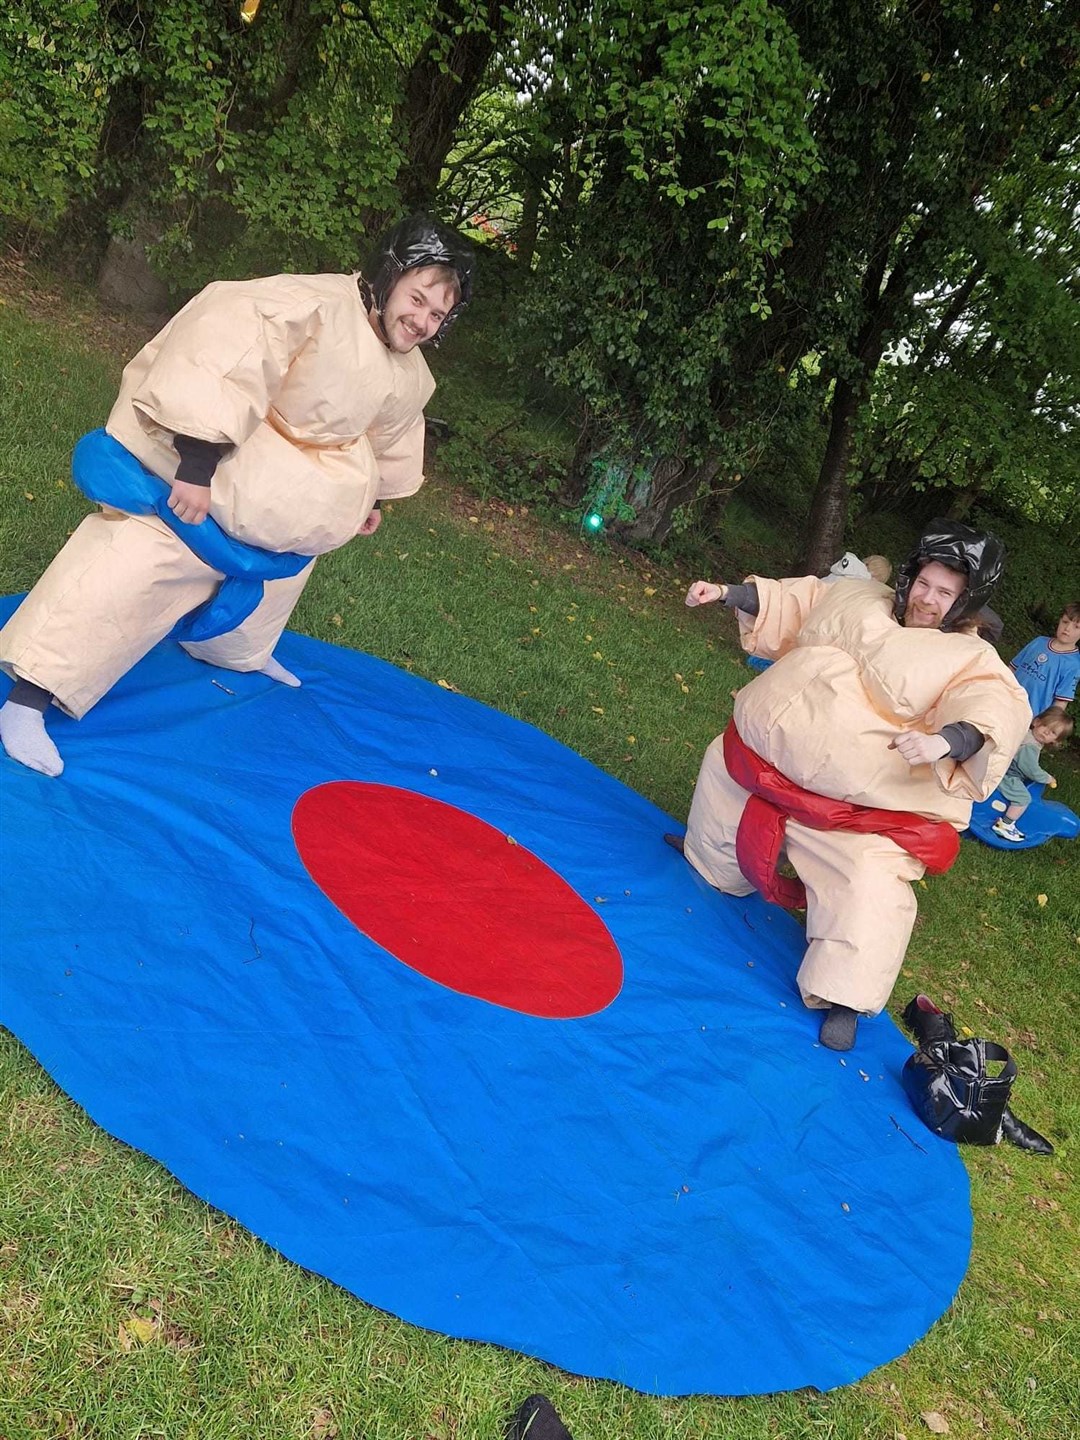 Conon Hotel first anniversary fun day: bar men Sandy Ironside and Logan McGee try the sumo suits